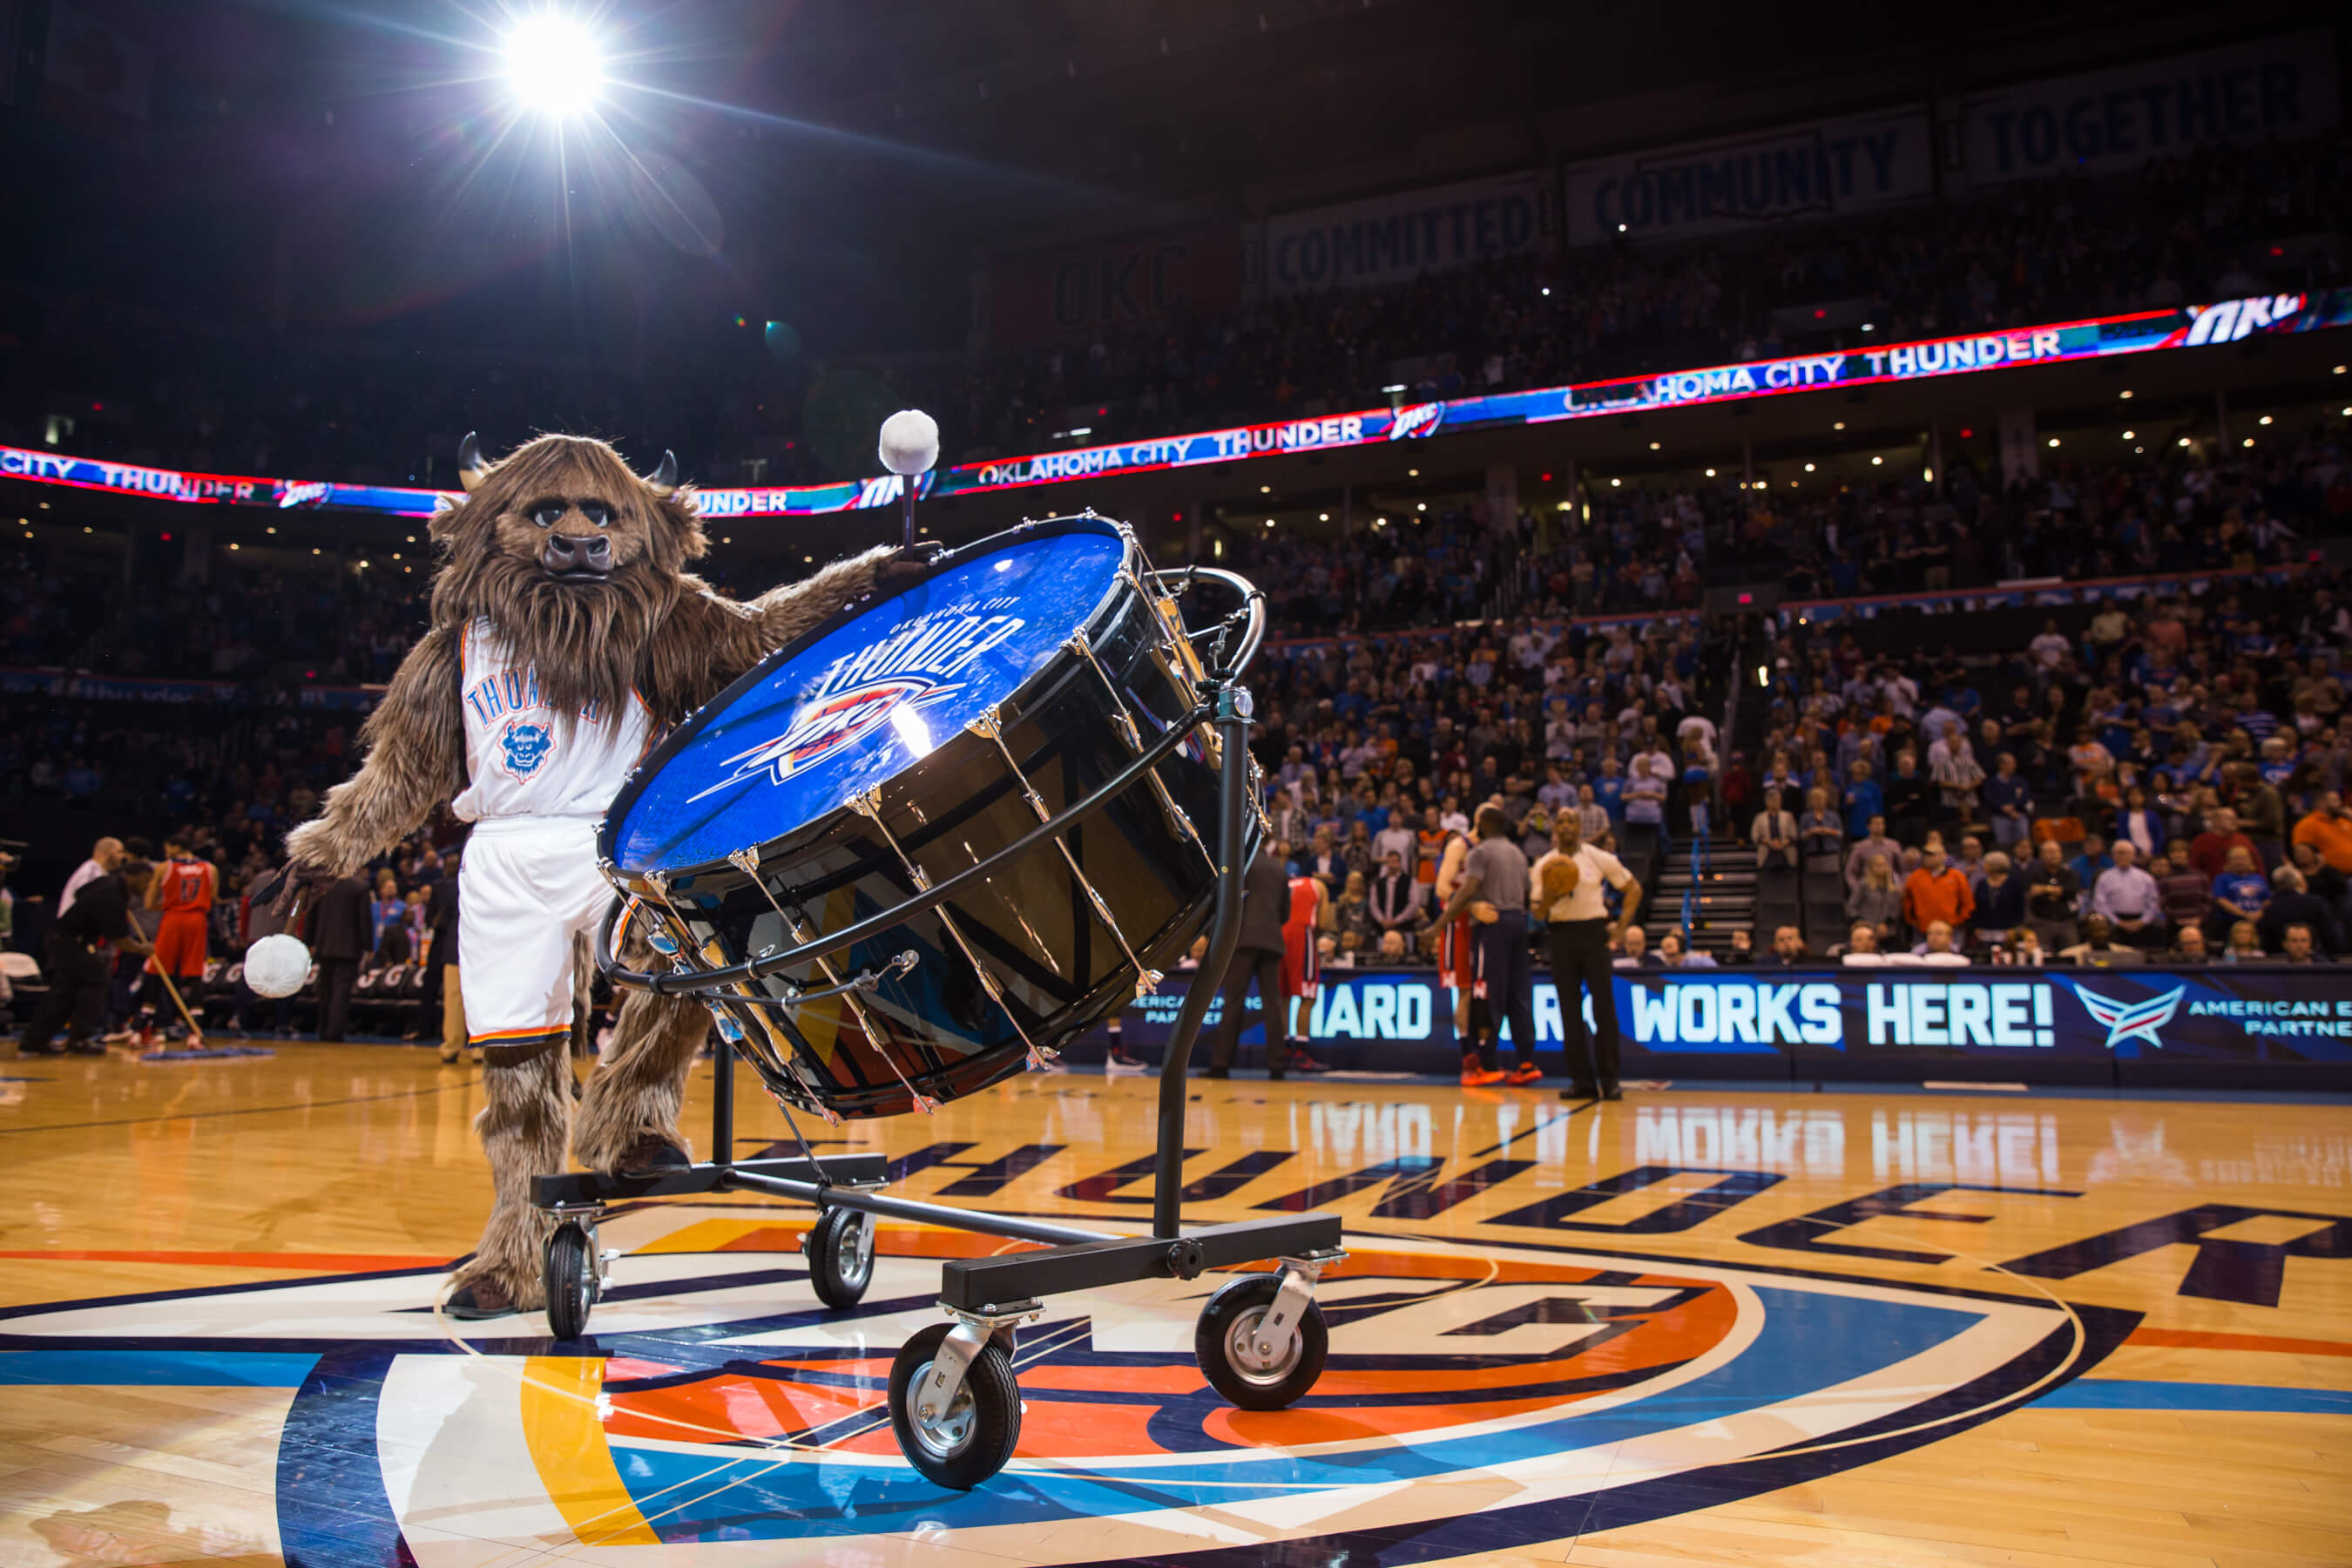 Oklahoma City Thunder Pulled Off One of the Coolest Crowd Stunts We've Seen  Last Night